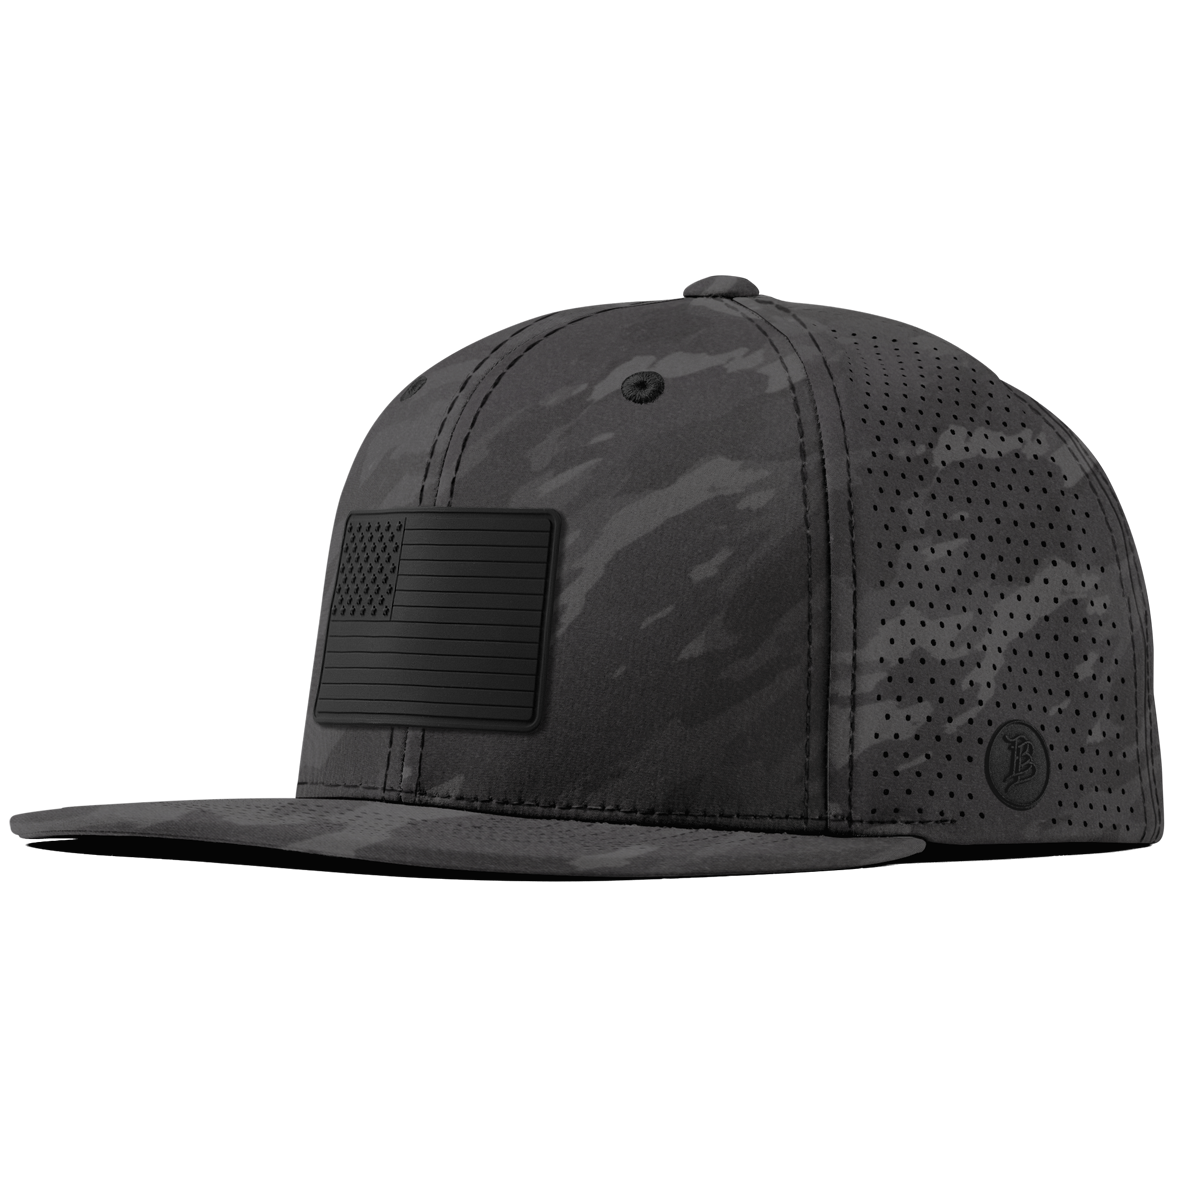 Old Glory Stealth Elite Classic Charcoal Camo